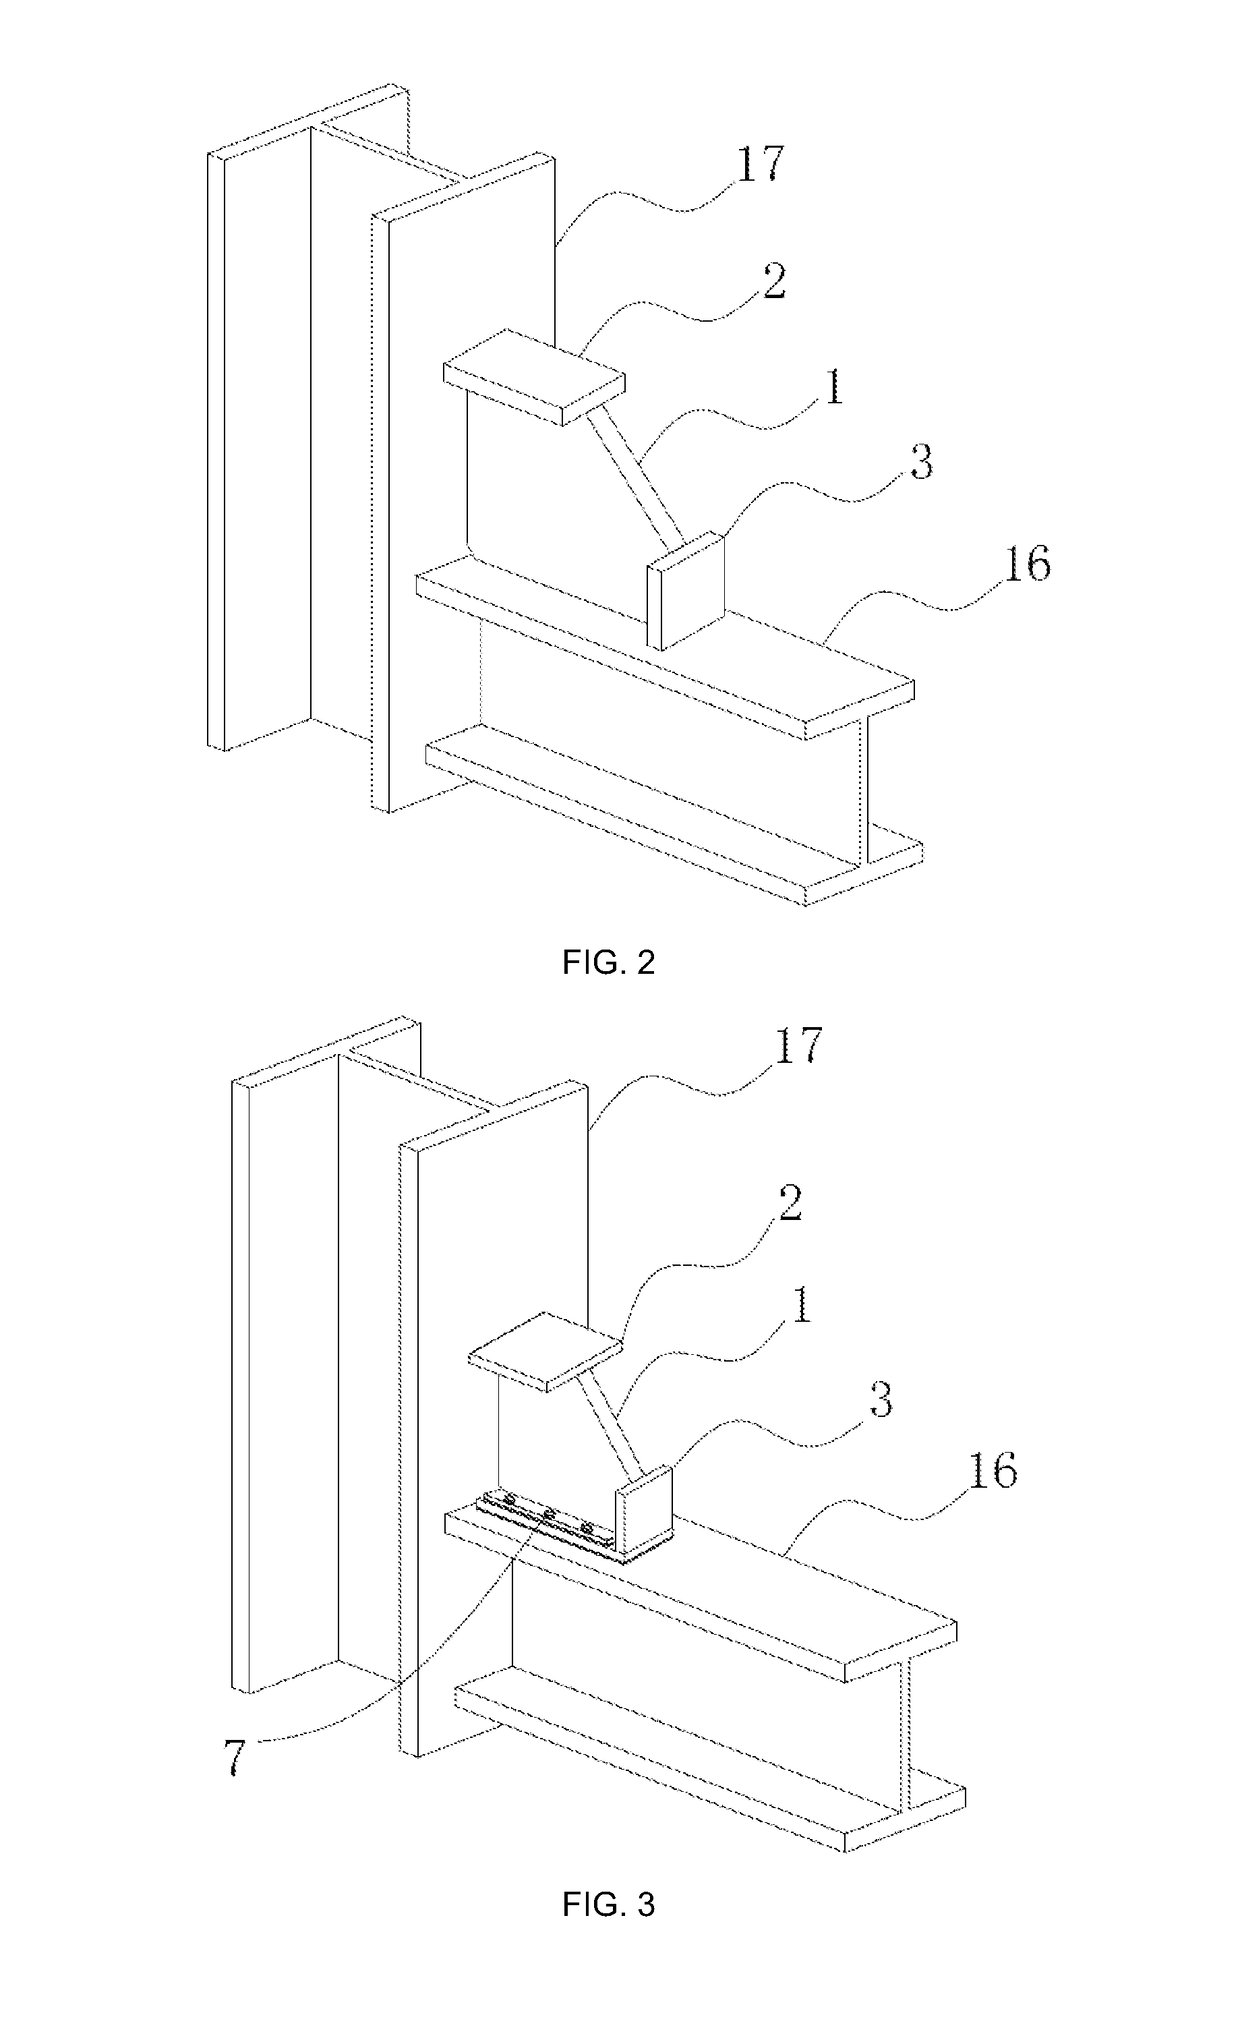 Connecting gusset plate with sliding end plate for buckling-restrained brace